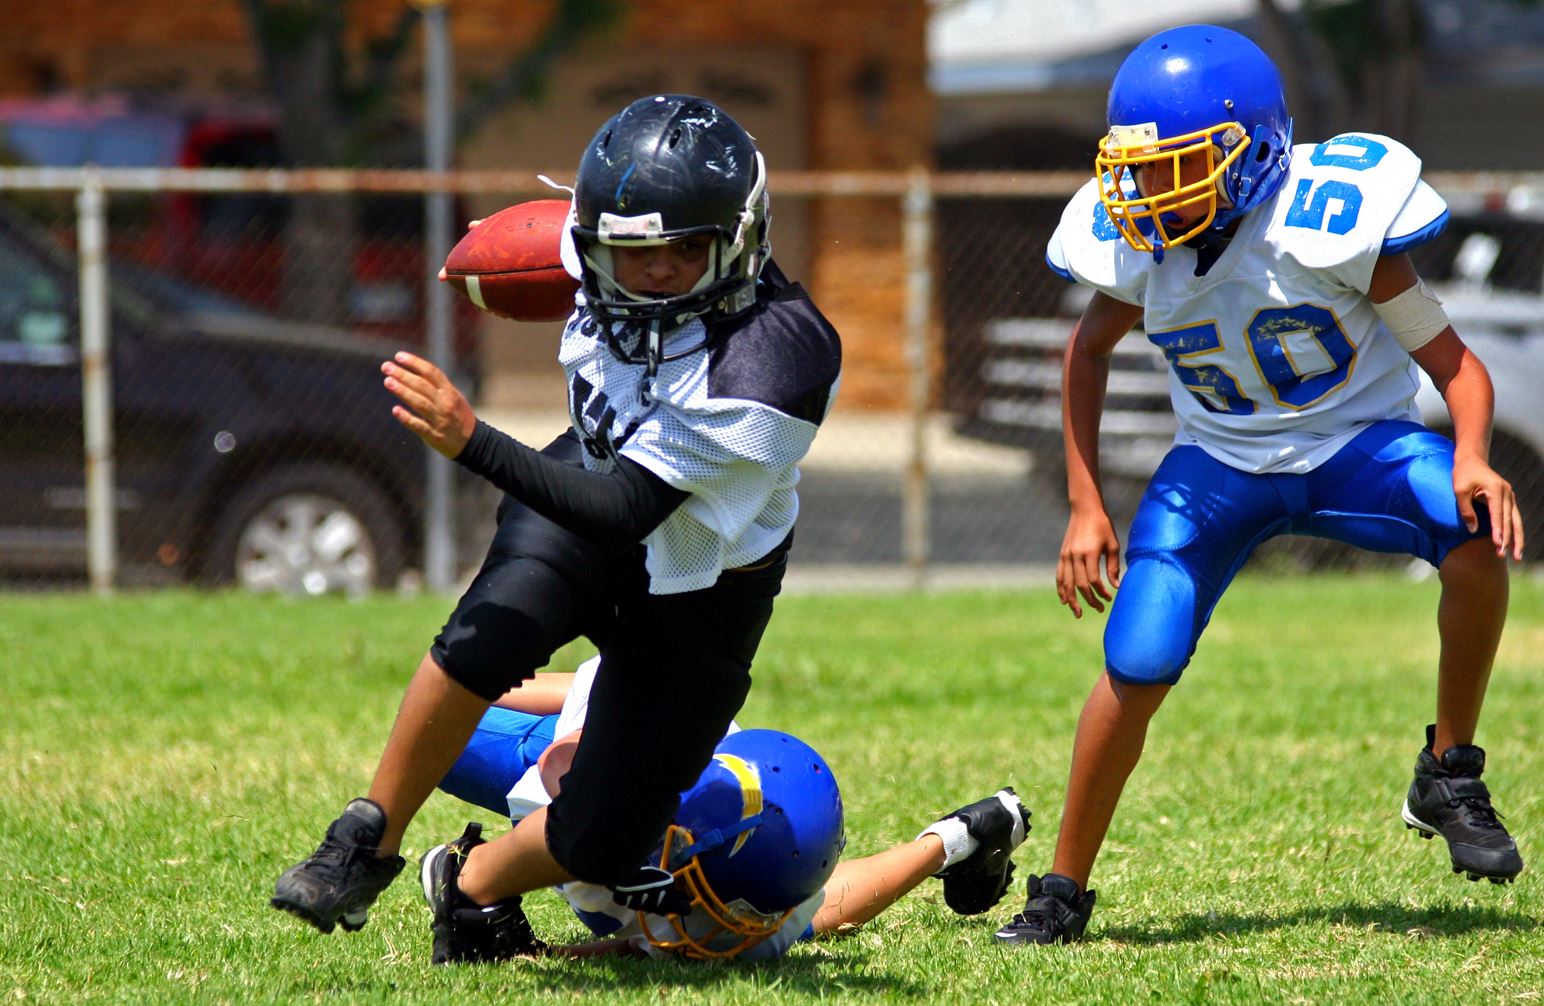 Injury Prevention Strategies for High-Impact Sports